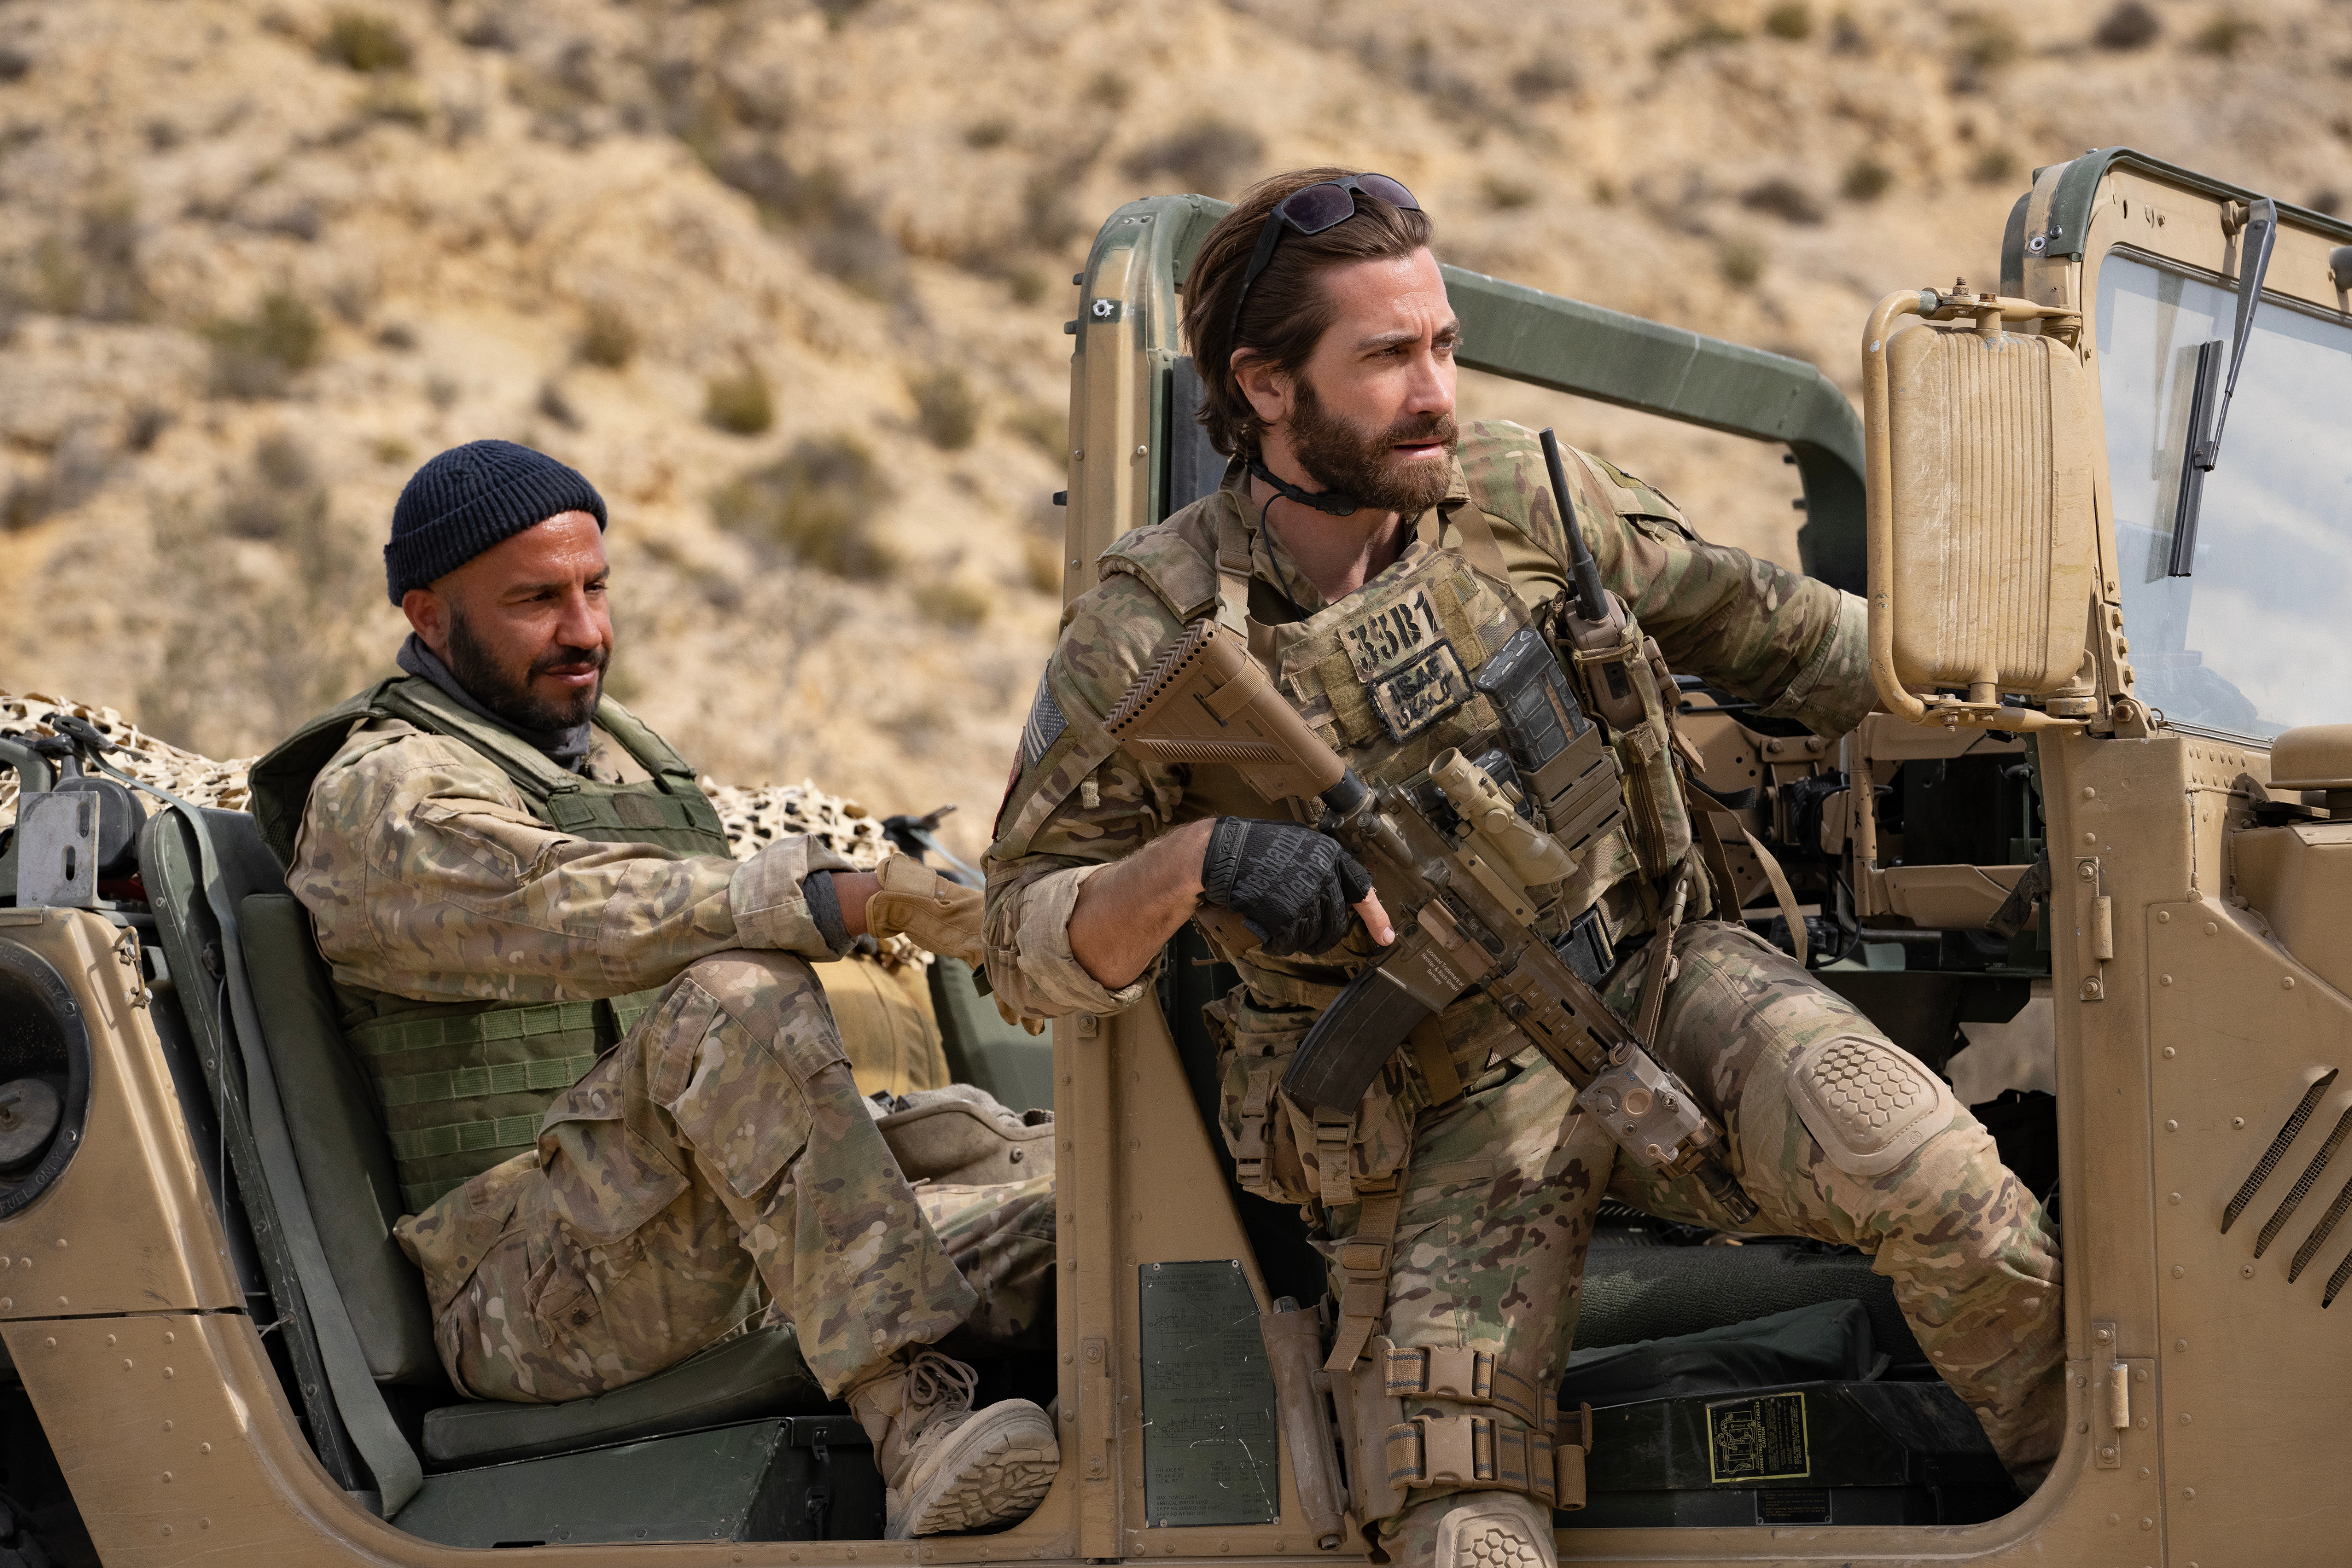 Dar Salim and Jake Gyllenhaal sit in a military Humvee together in The Covenant.